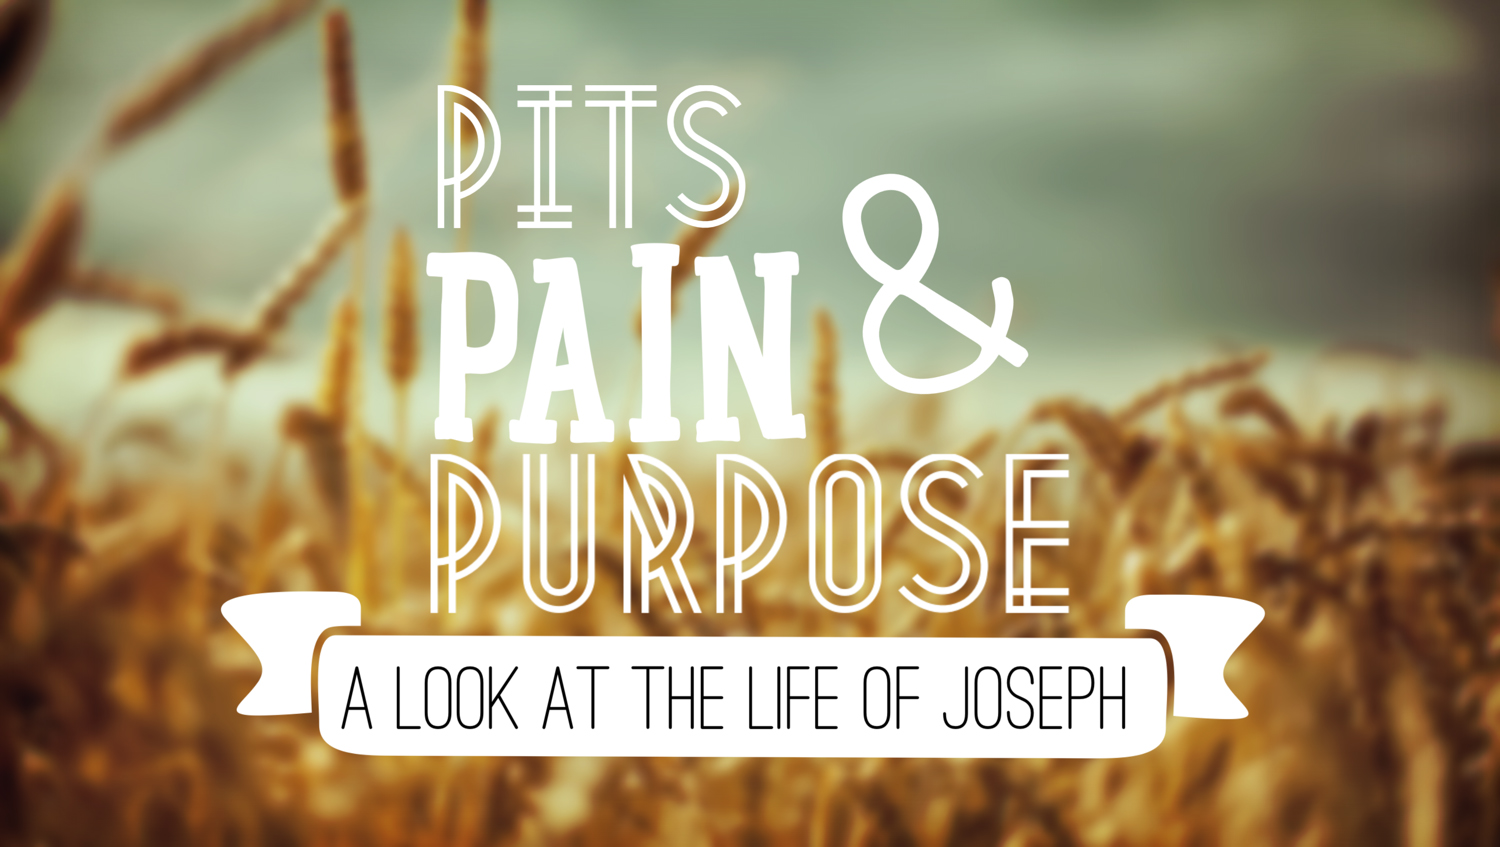 Pits Pain and Purpose 